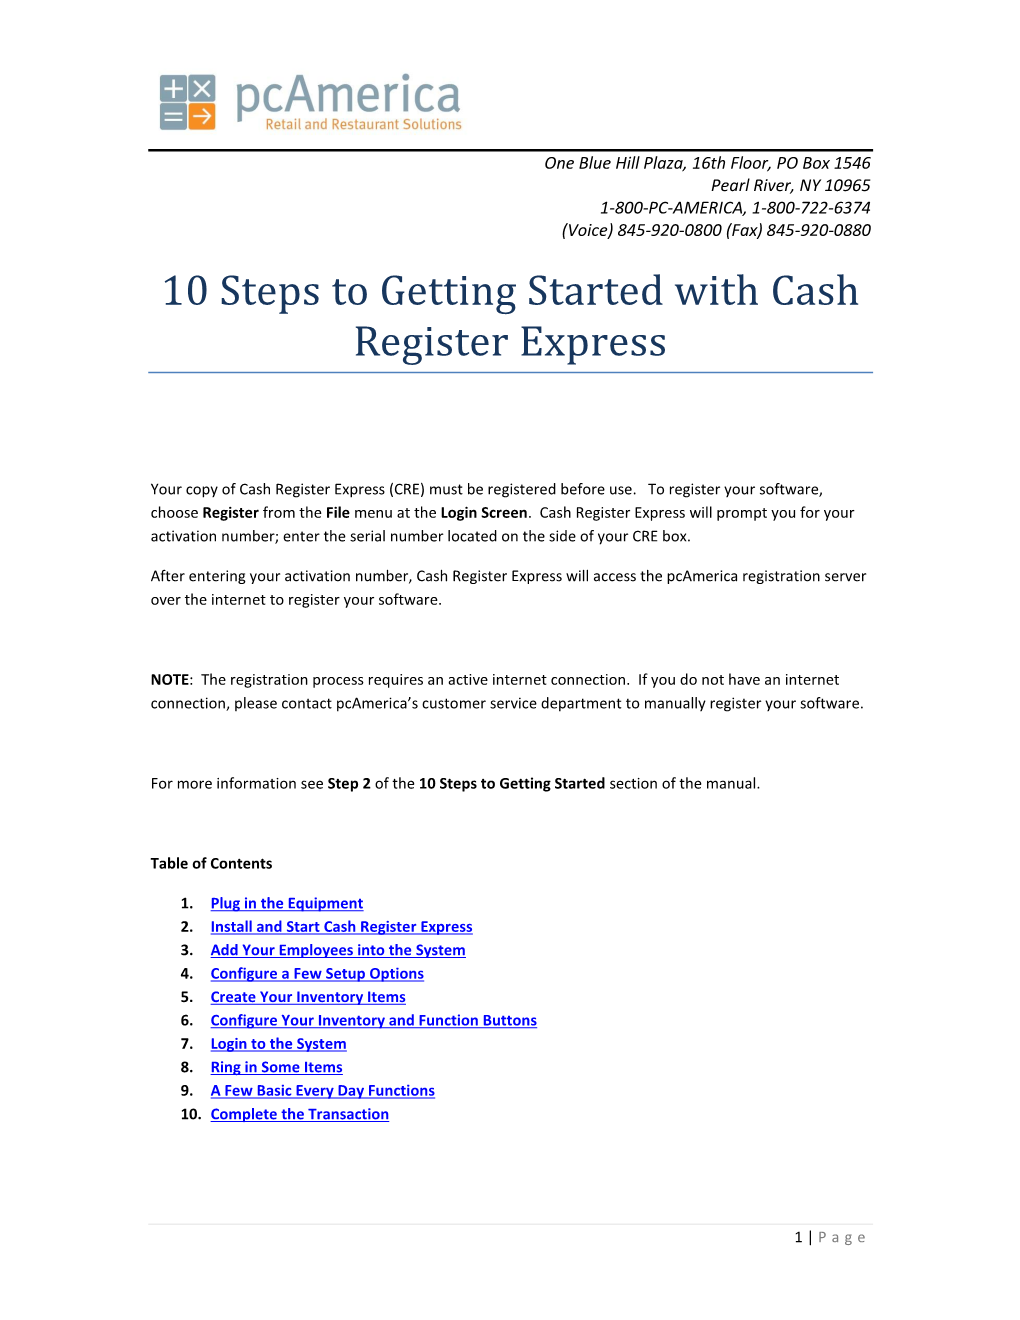 10 Steps to Getting Started with Cash Register Express